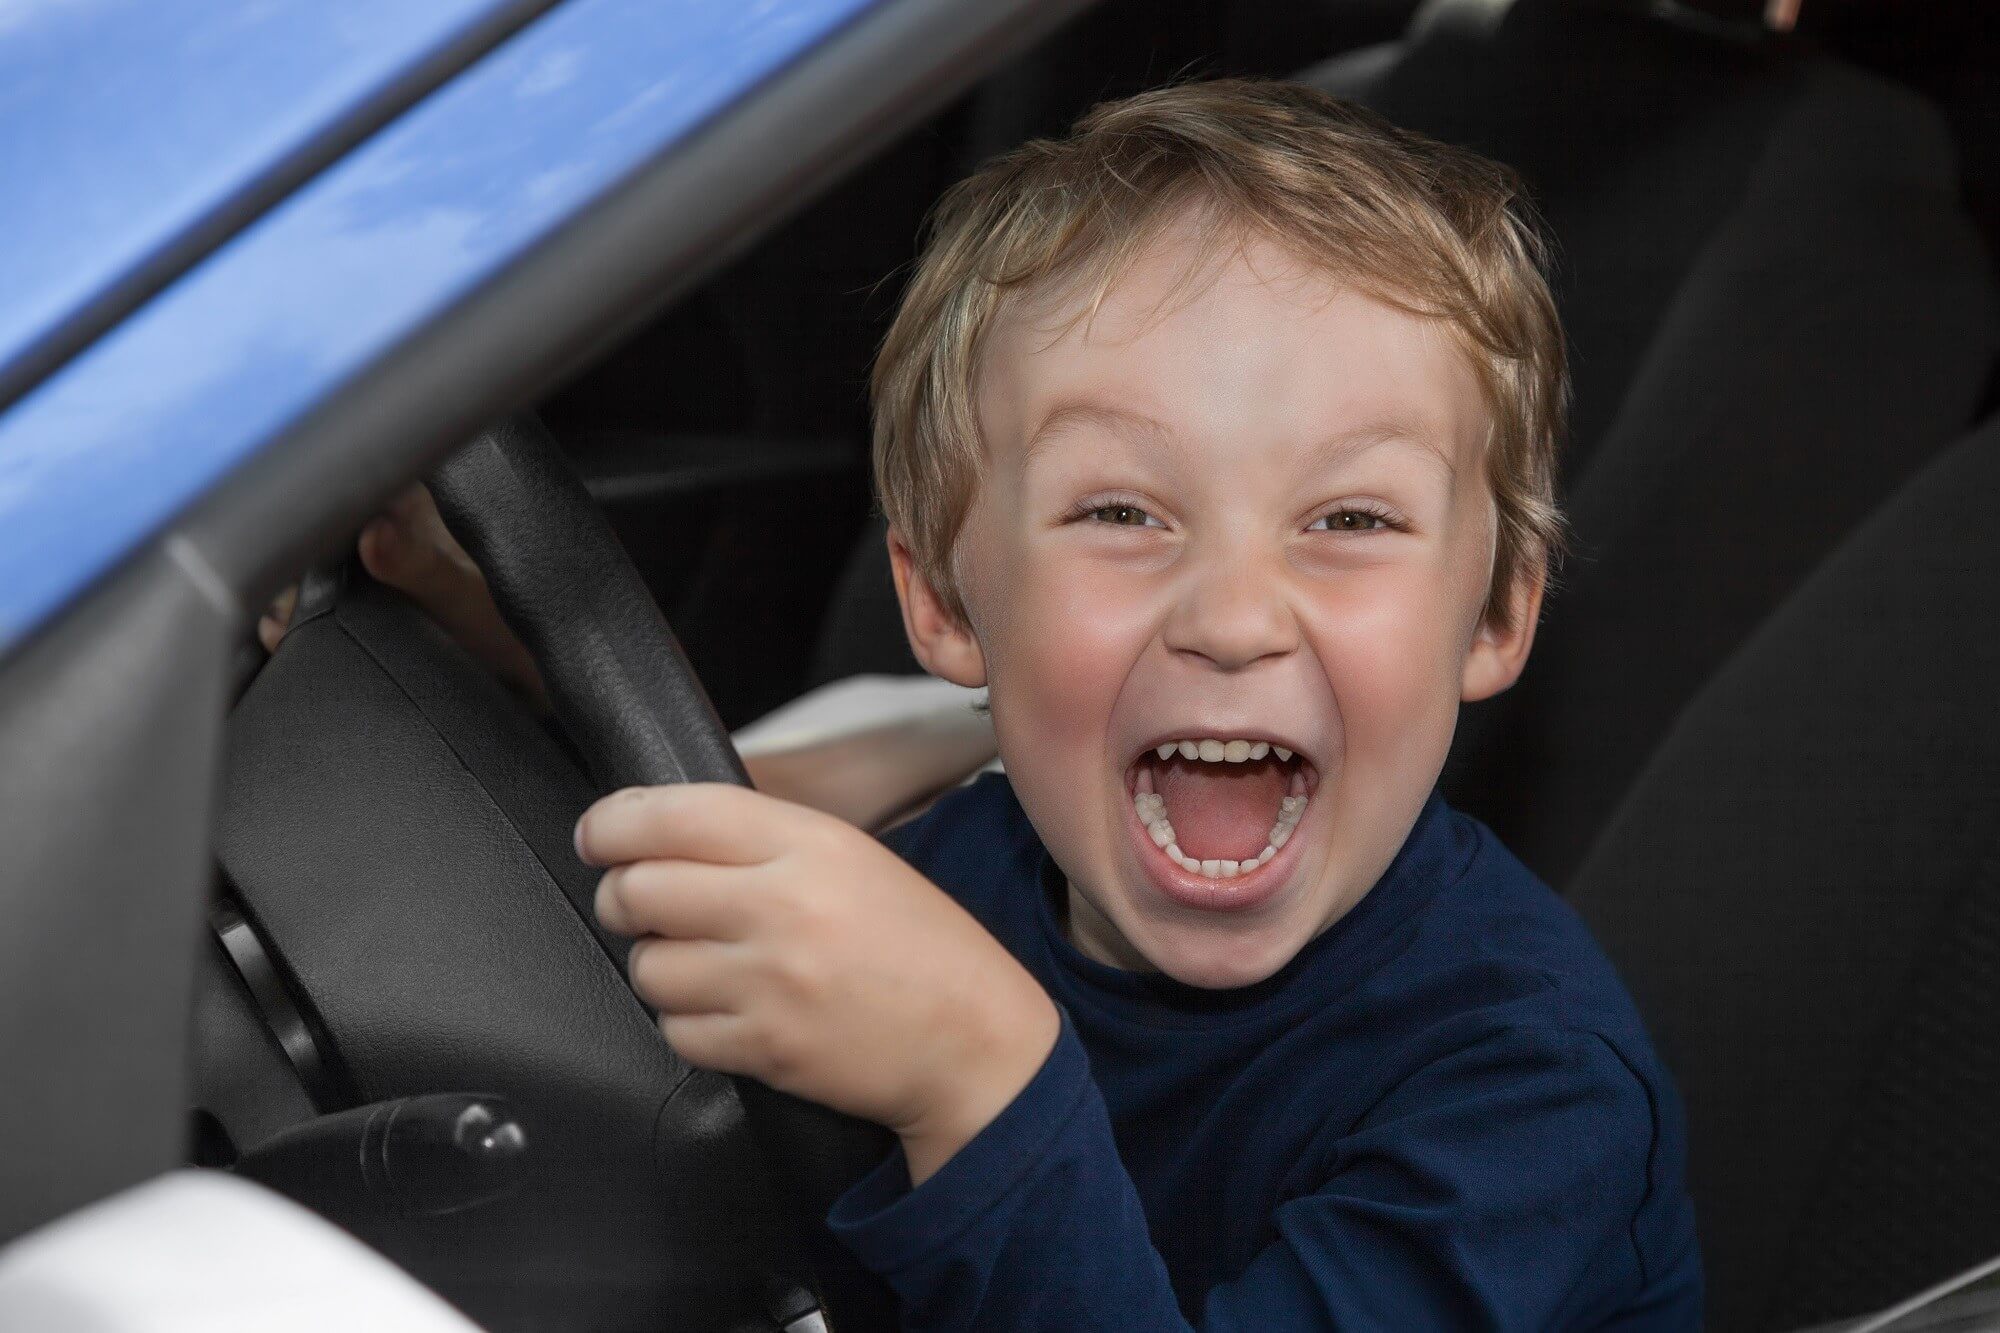 Parents allow 11-year-old to drive car because they were sick of him playing GTA all day